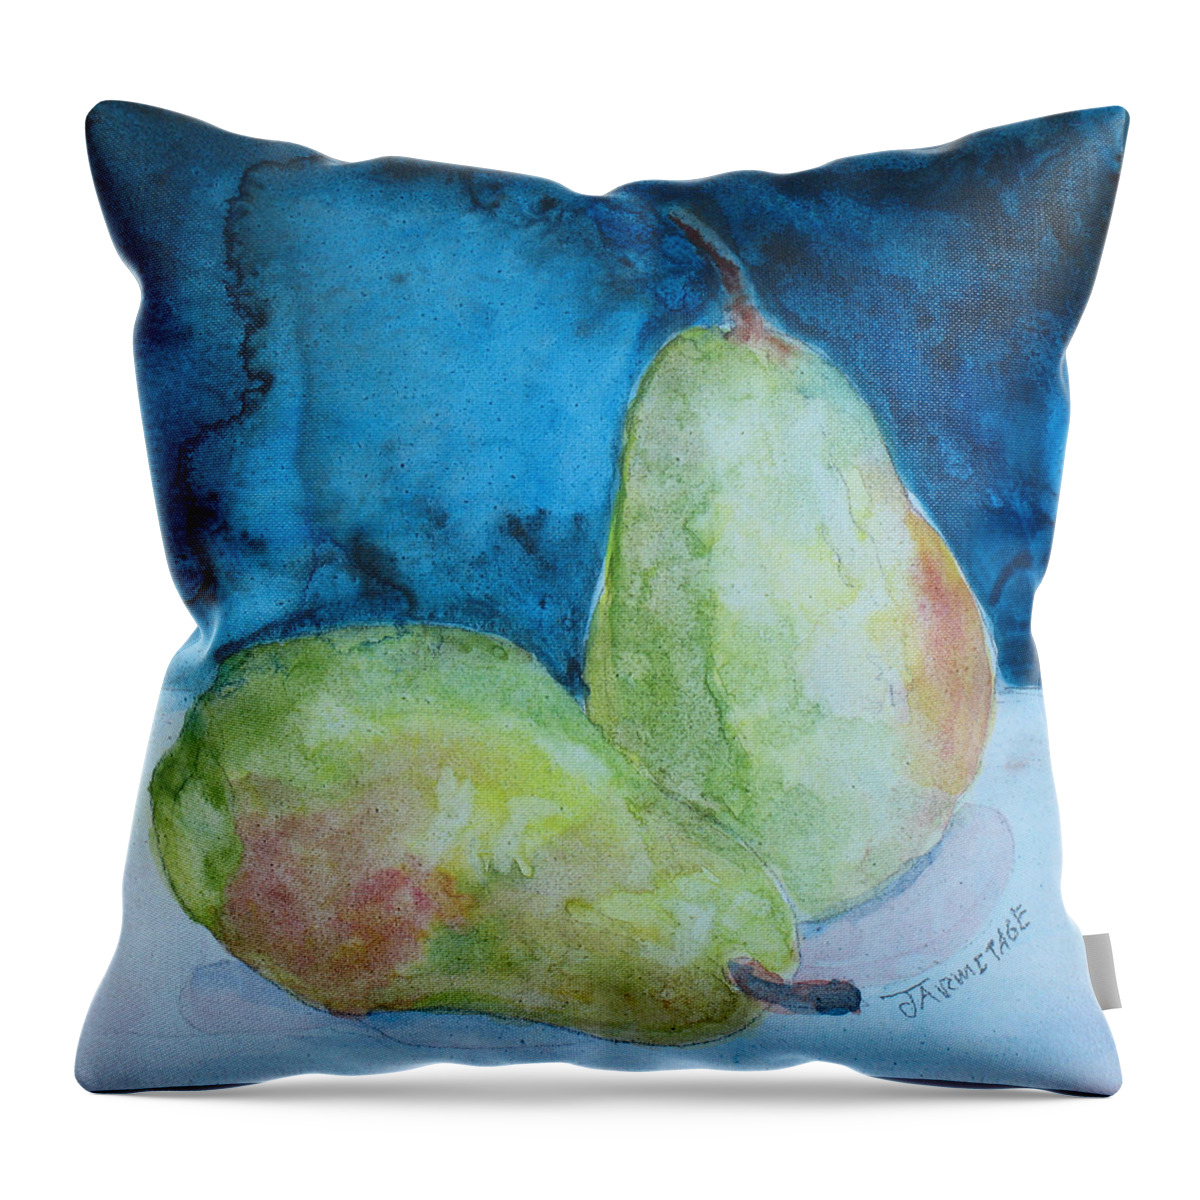 Pears Throw Pillow featuring the painting Blushing Pears by Jenny Armitage